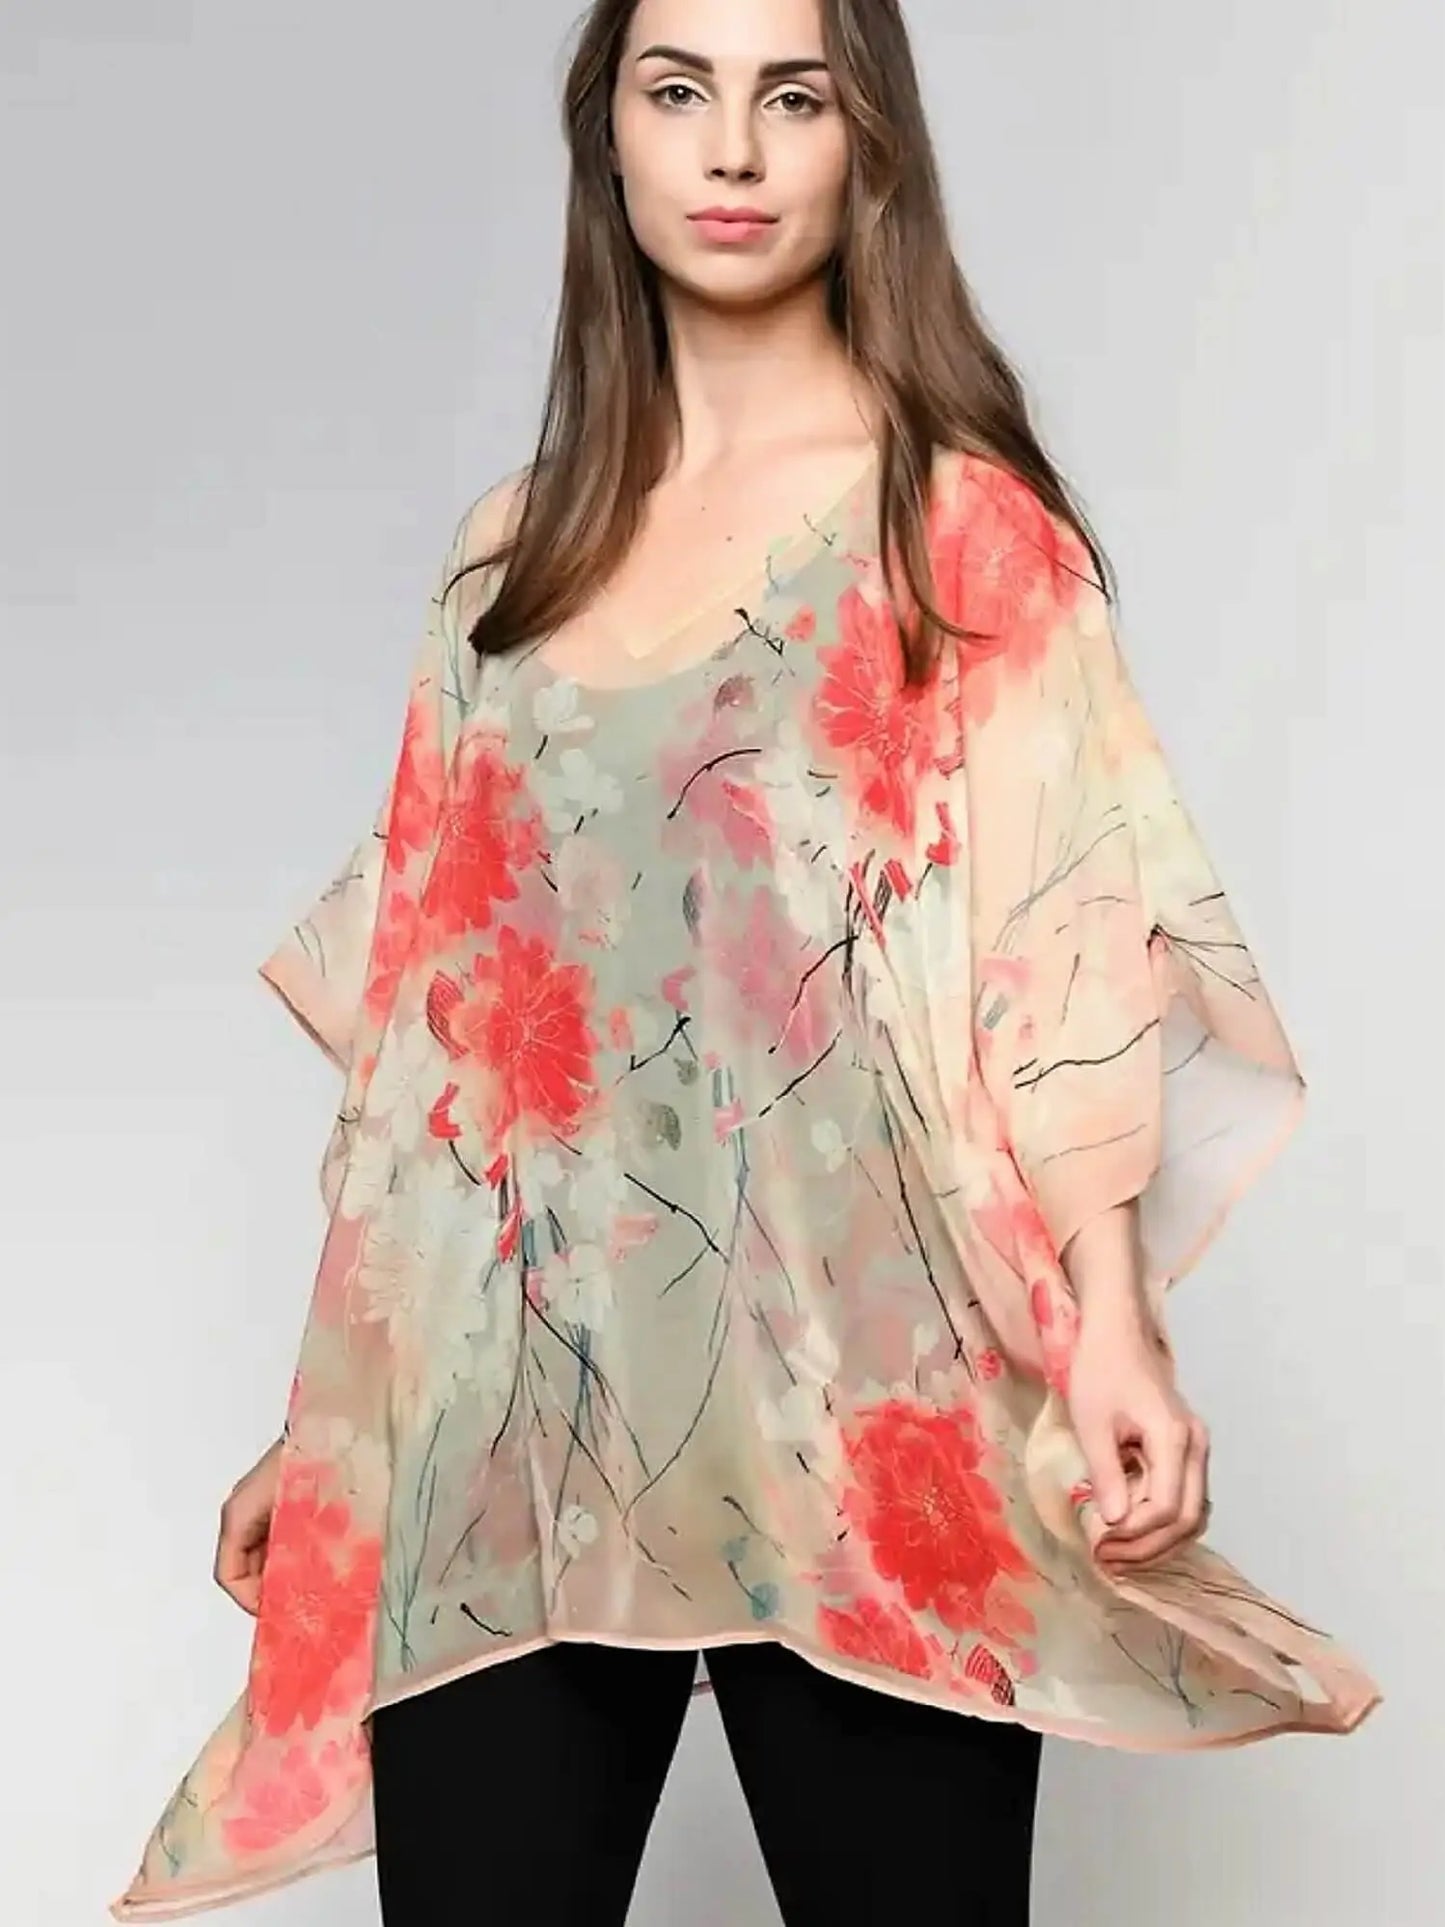 Boho tunic top in coral floral print by Sevya Handmade